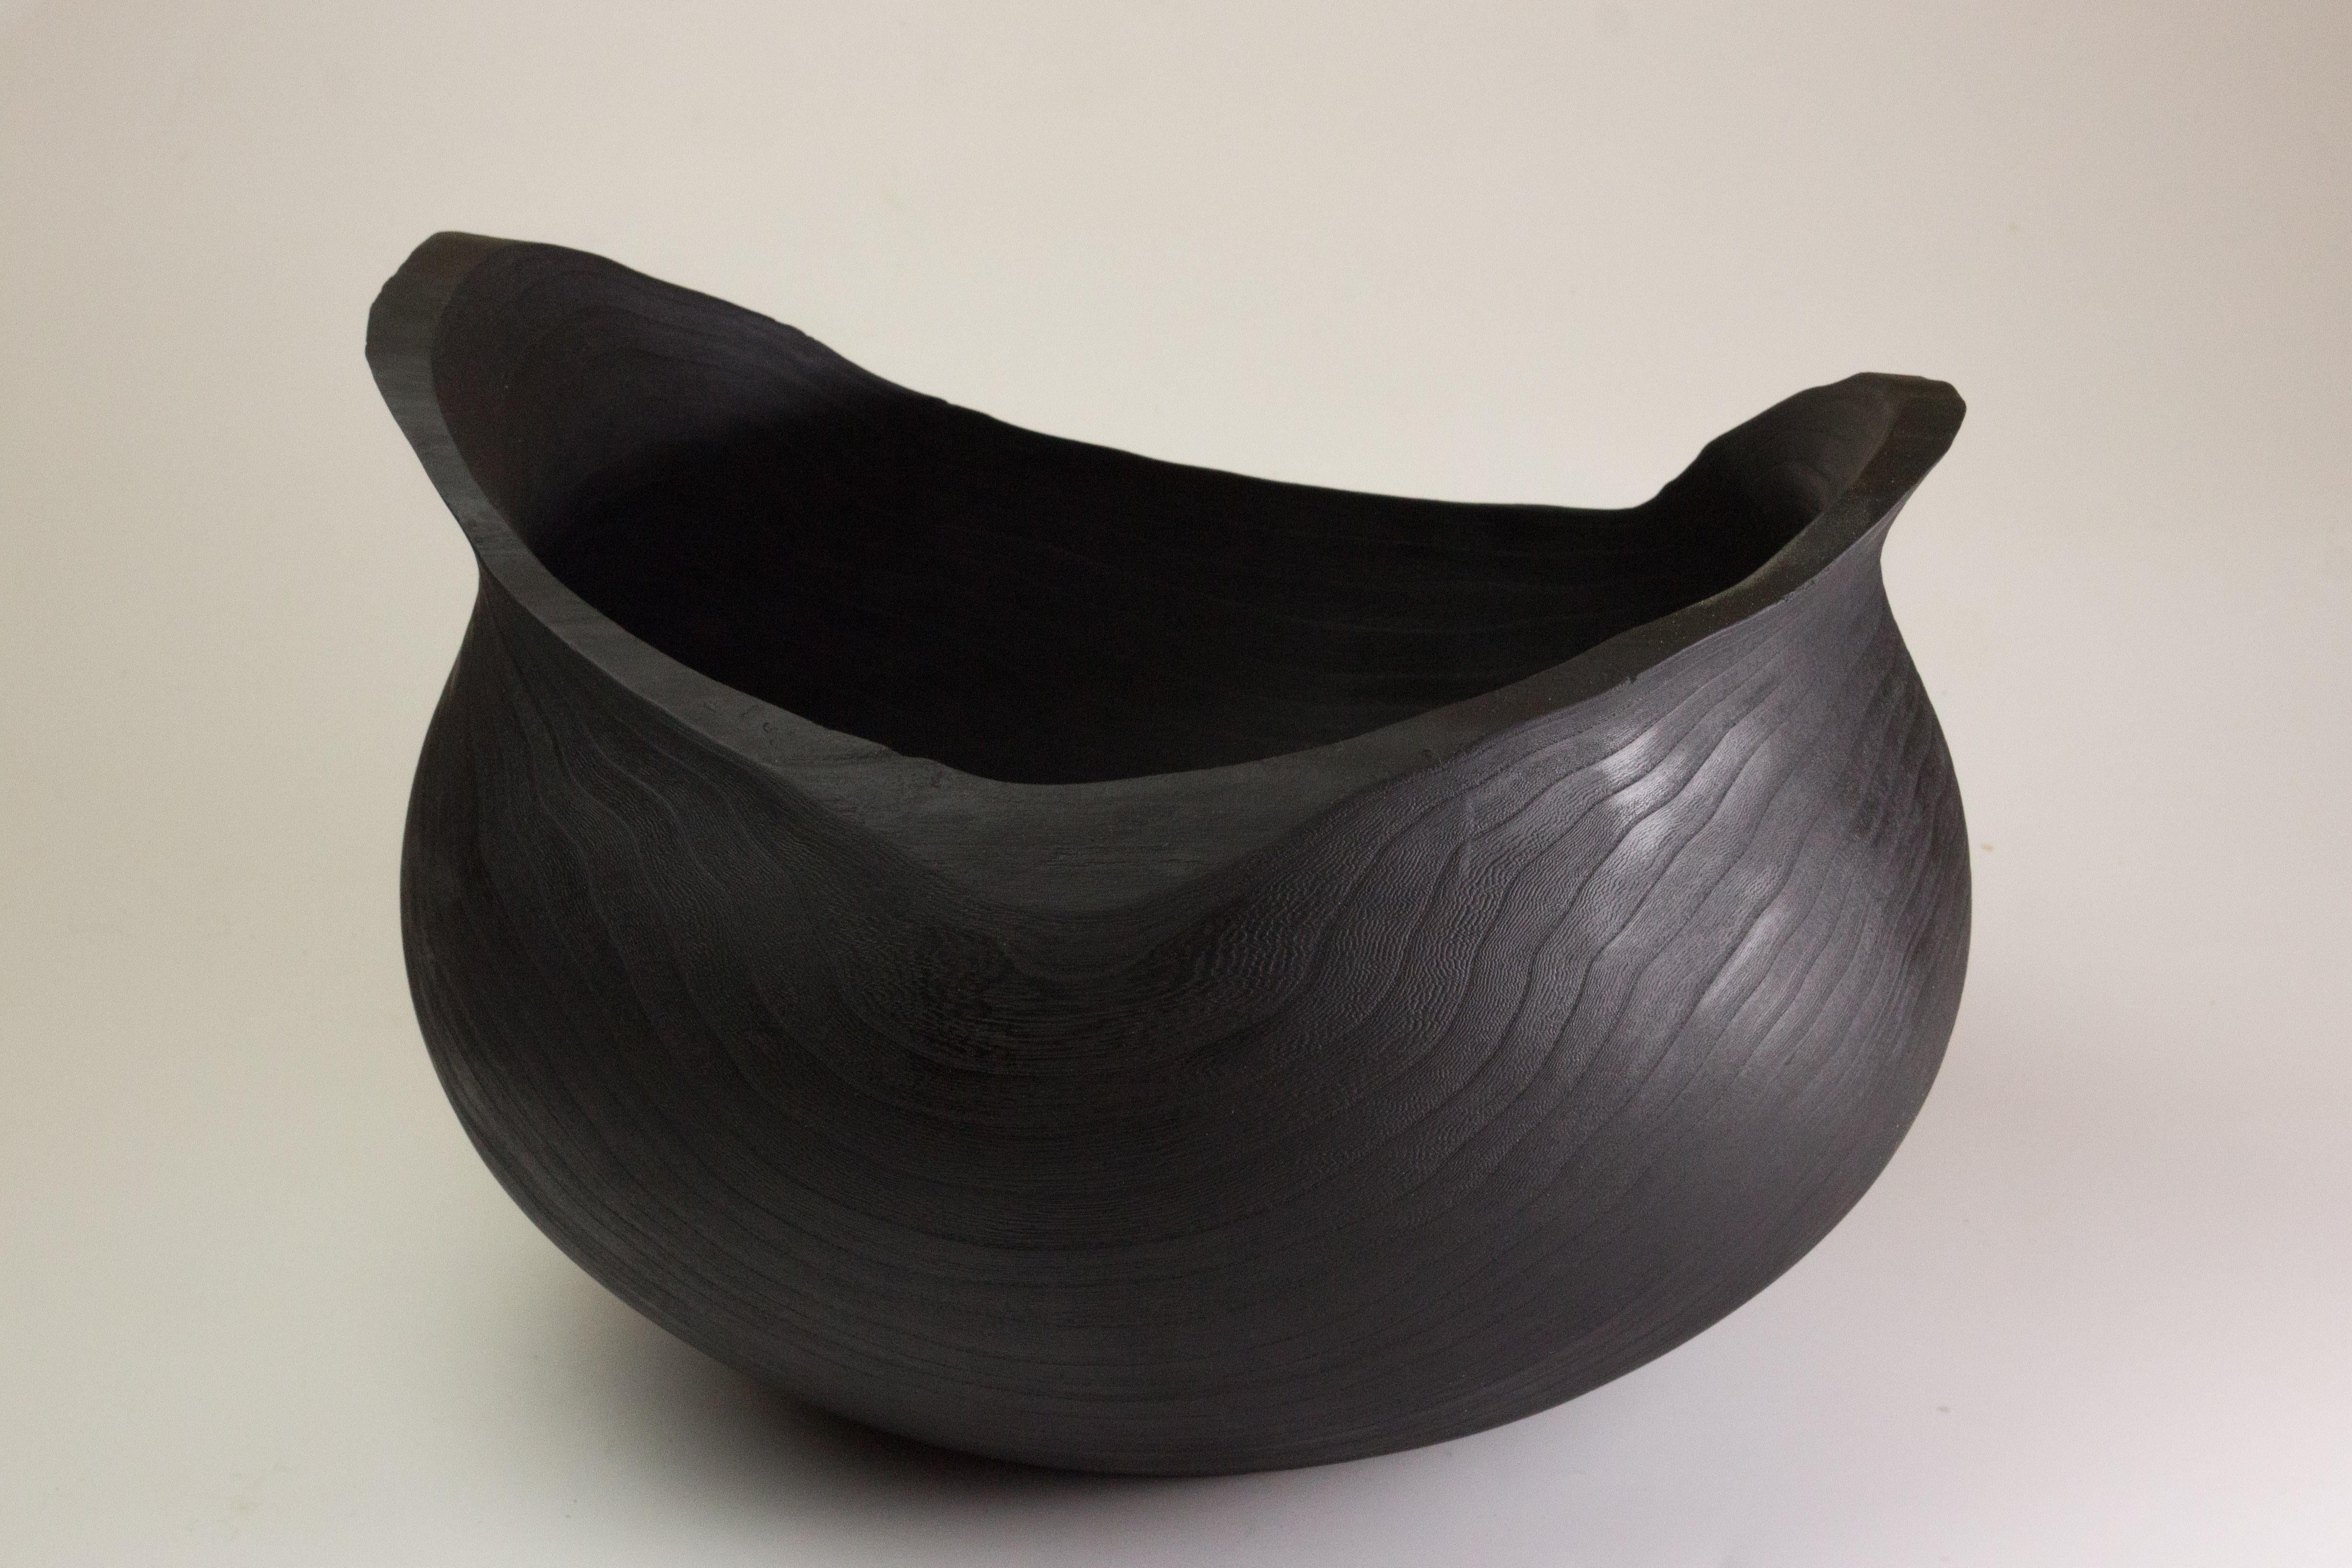 Dyed Elm Bowl 39 by Vlad Droz